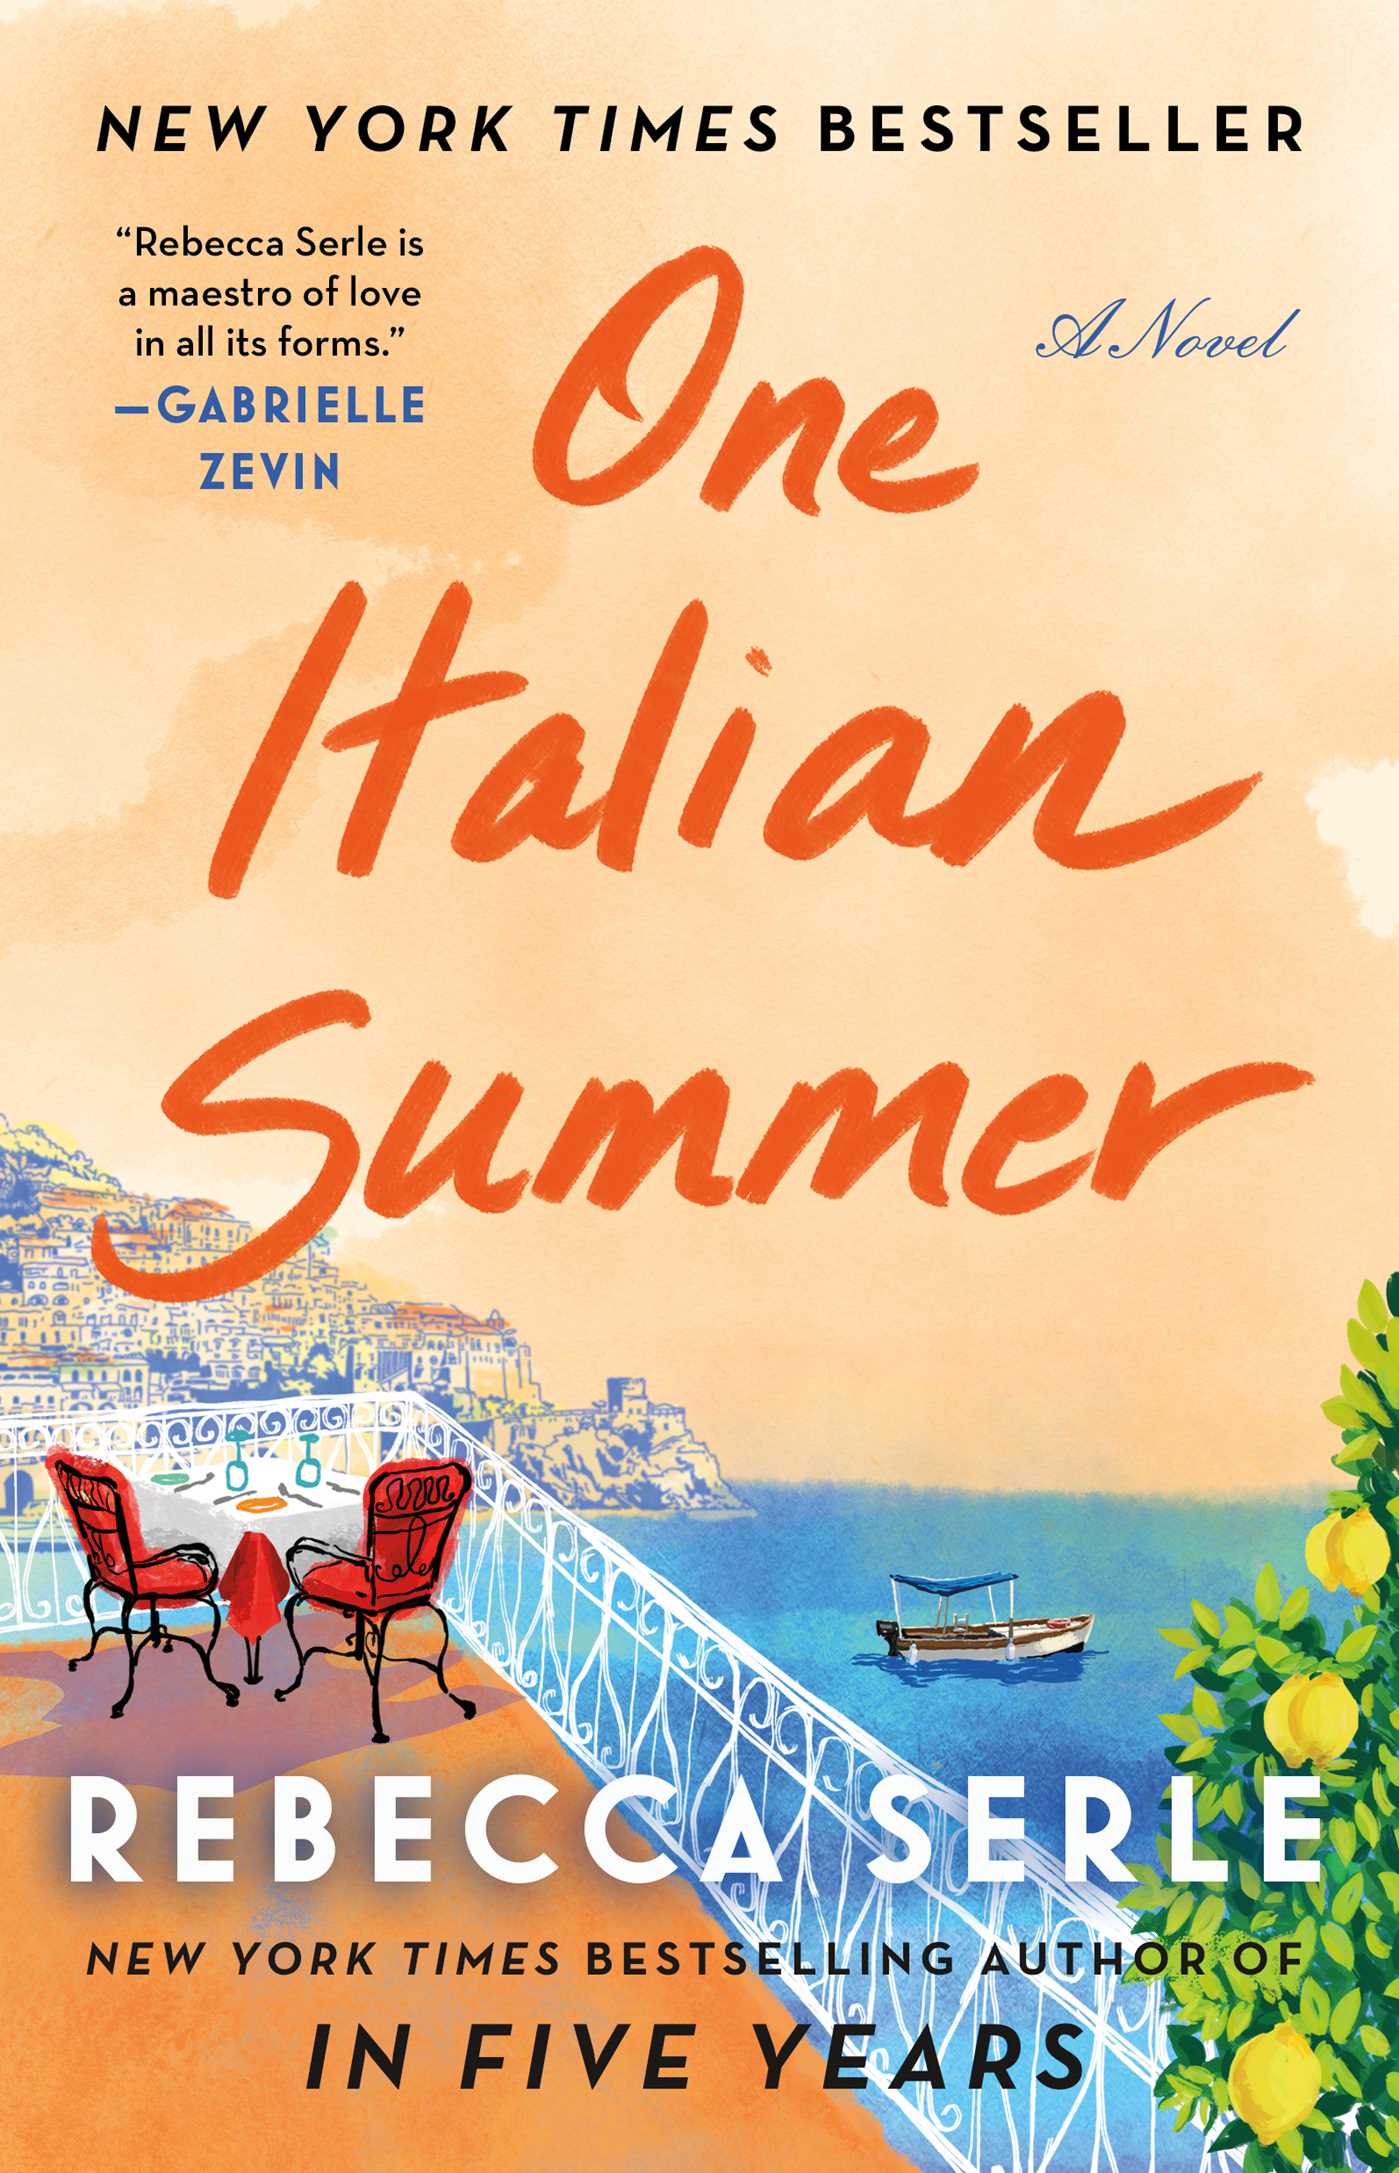 Cover Image of One Italian Summer